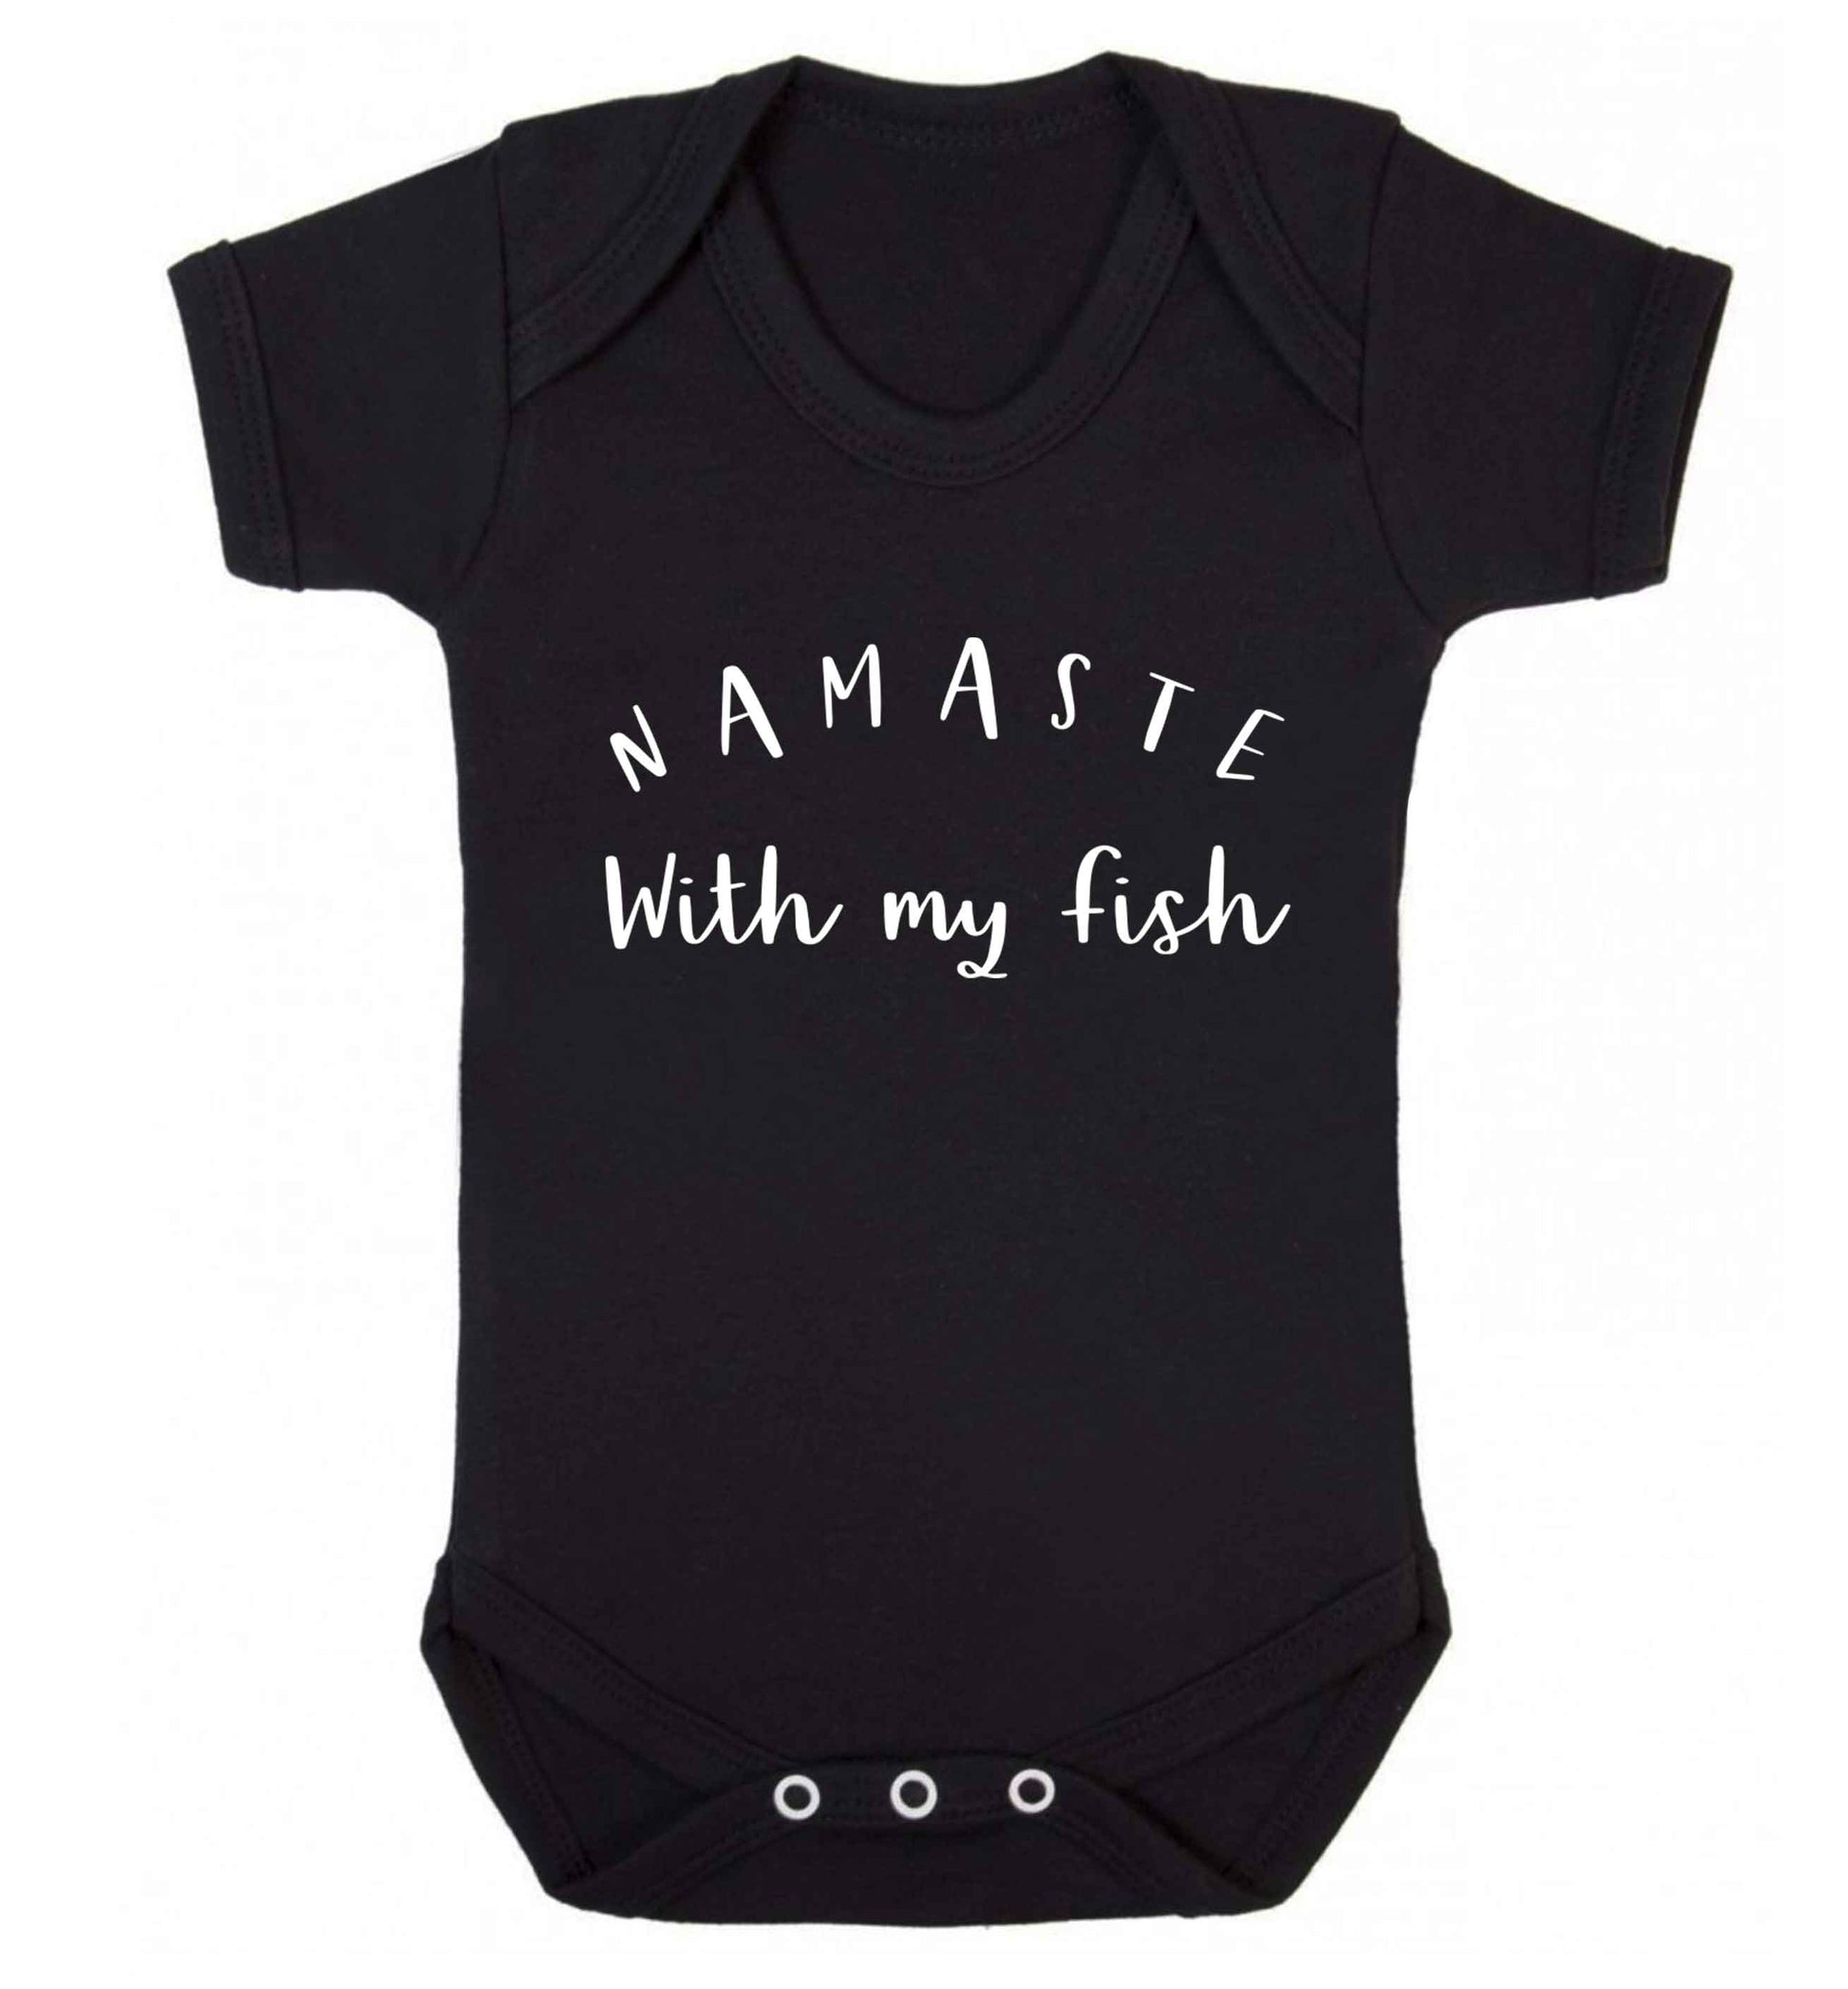 Namaste with my fish Baby Vest black 18-24 months